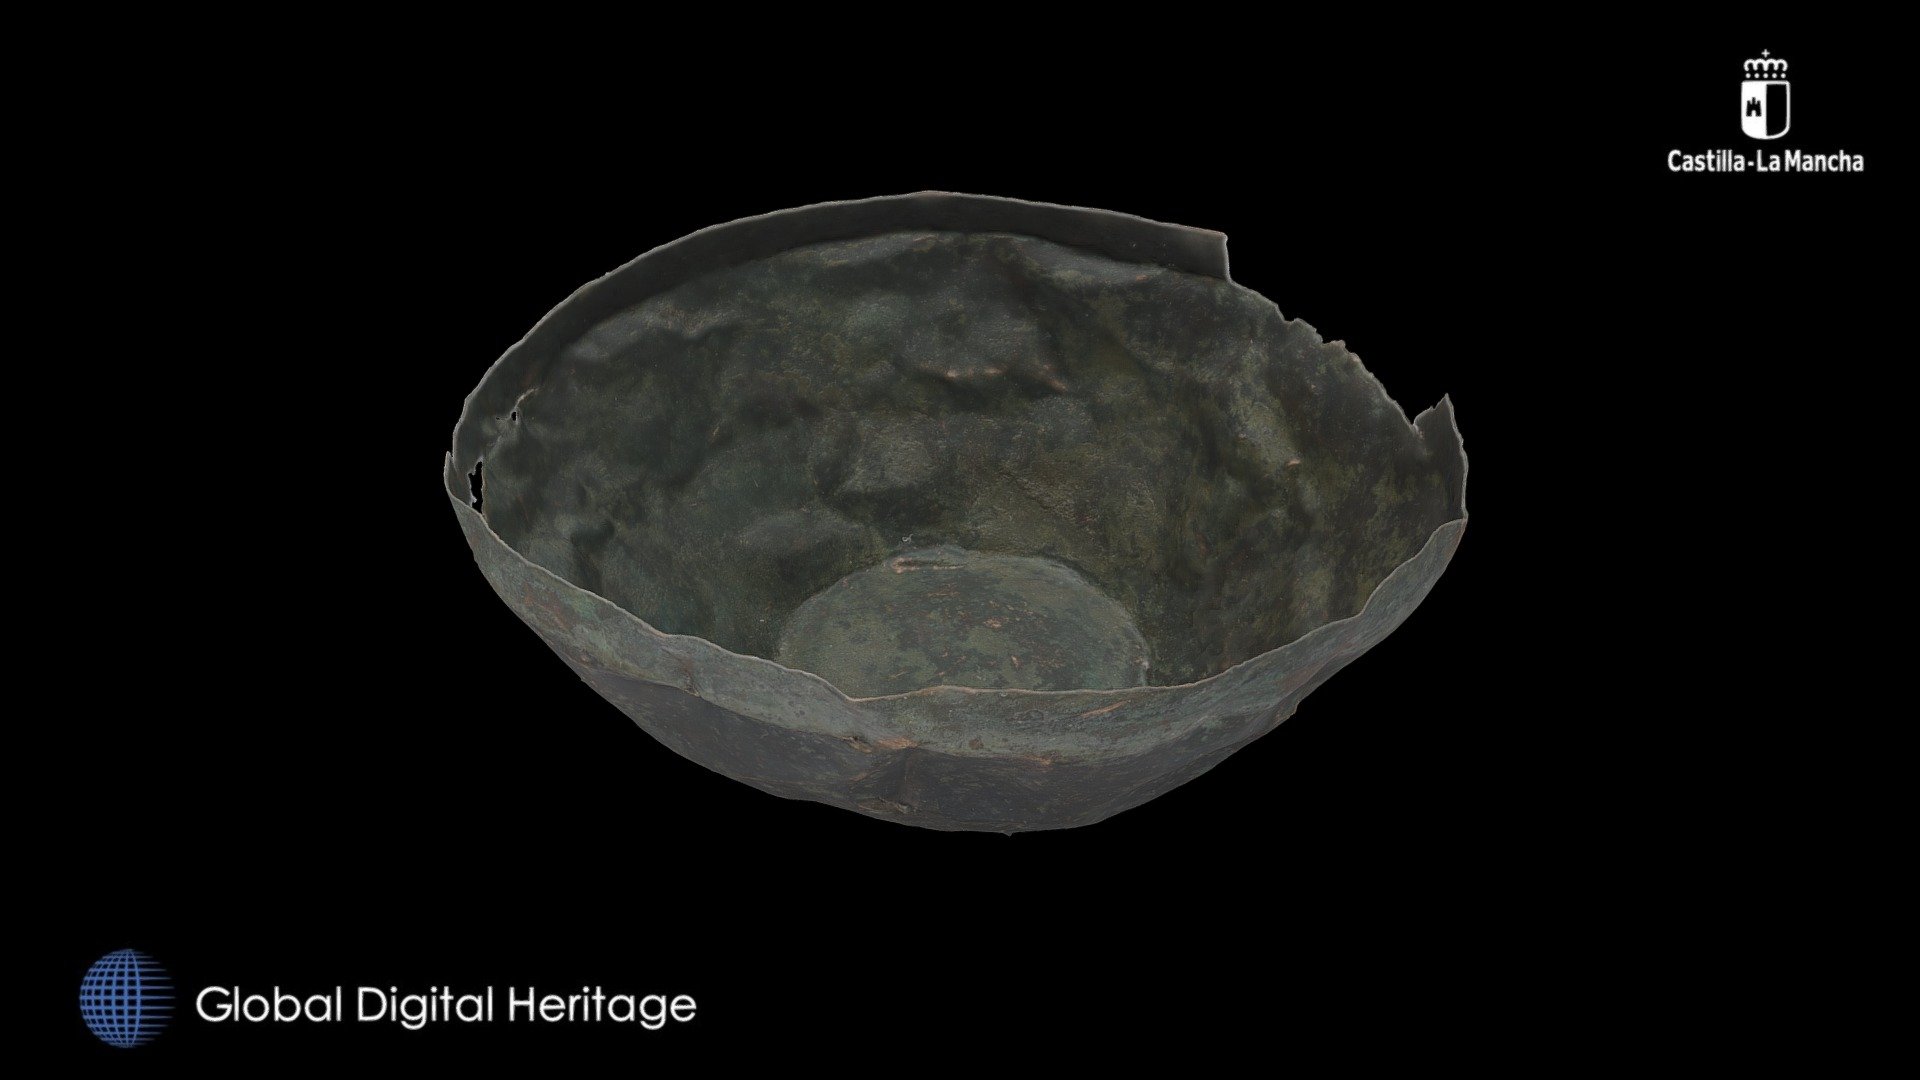 &ldquo;Bronze bowl from an unidentifed site,  Castilla-La Mancha, Spain.  In the collection of the Ciudad Real Museum.  Catalog number DO000612. Processed in Reality Capture from 511 images. 

Salvador Jiménez Collection
Year of admission 1996
Exp. 183/96.

This work is part of the collaboration agreement signed in 2020 between the Junta de Comunidades de Castilla-La Mancha and Global Digital Heritage for the digitization of the Cultural Heritage of Castilla-La Mancha region. We want to publicly thank the collaboration of the Museum of Ciudad Real, especially by its director José Ignacio de la Torre 3d model